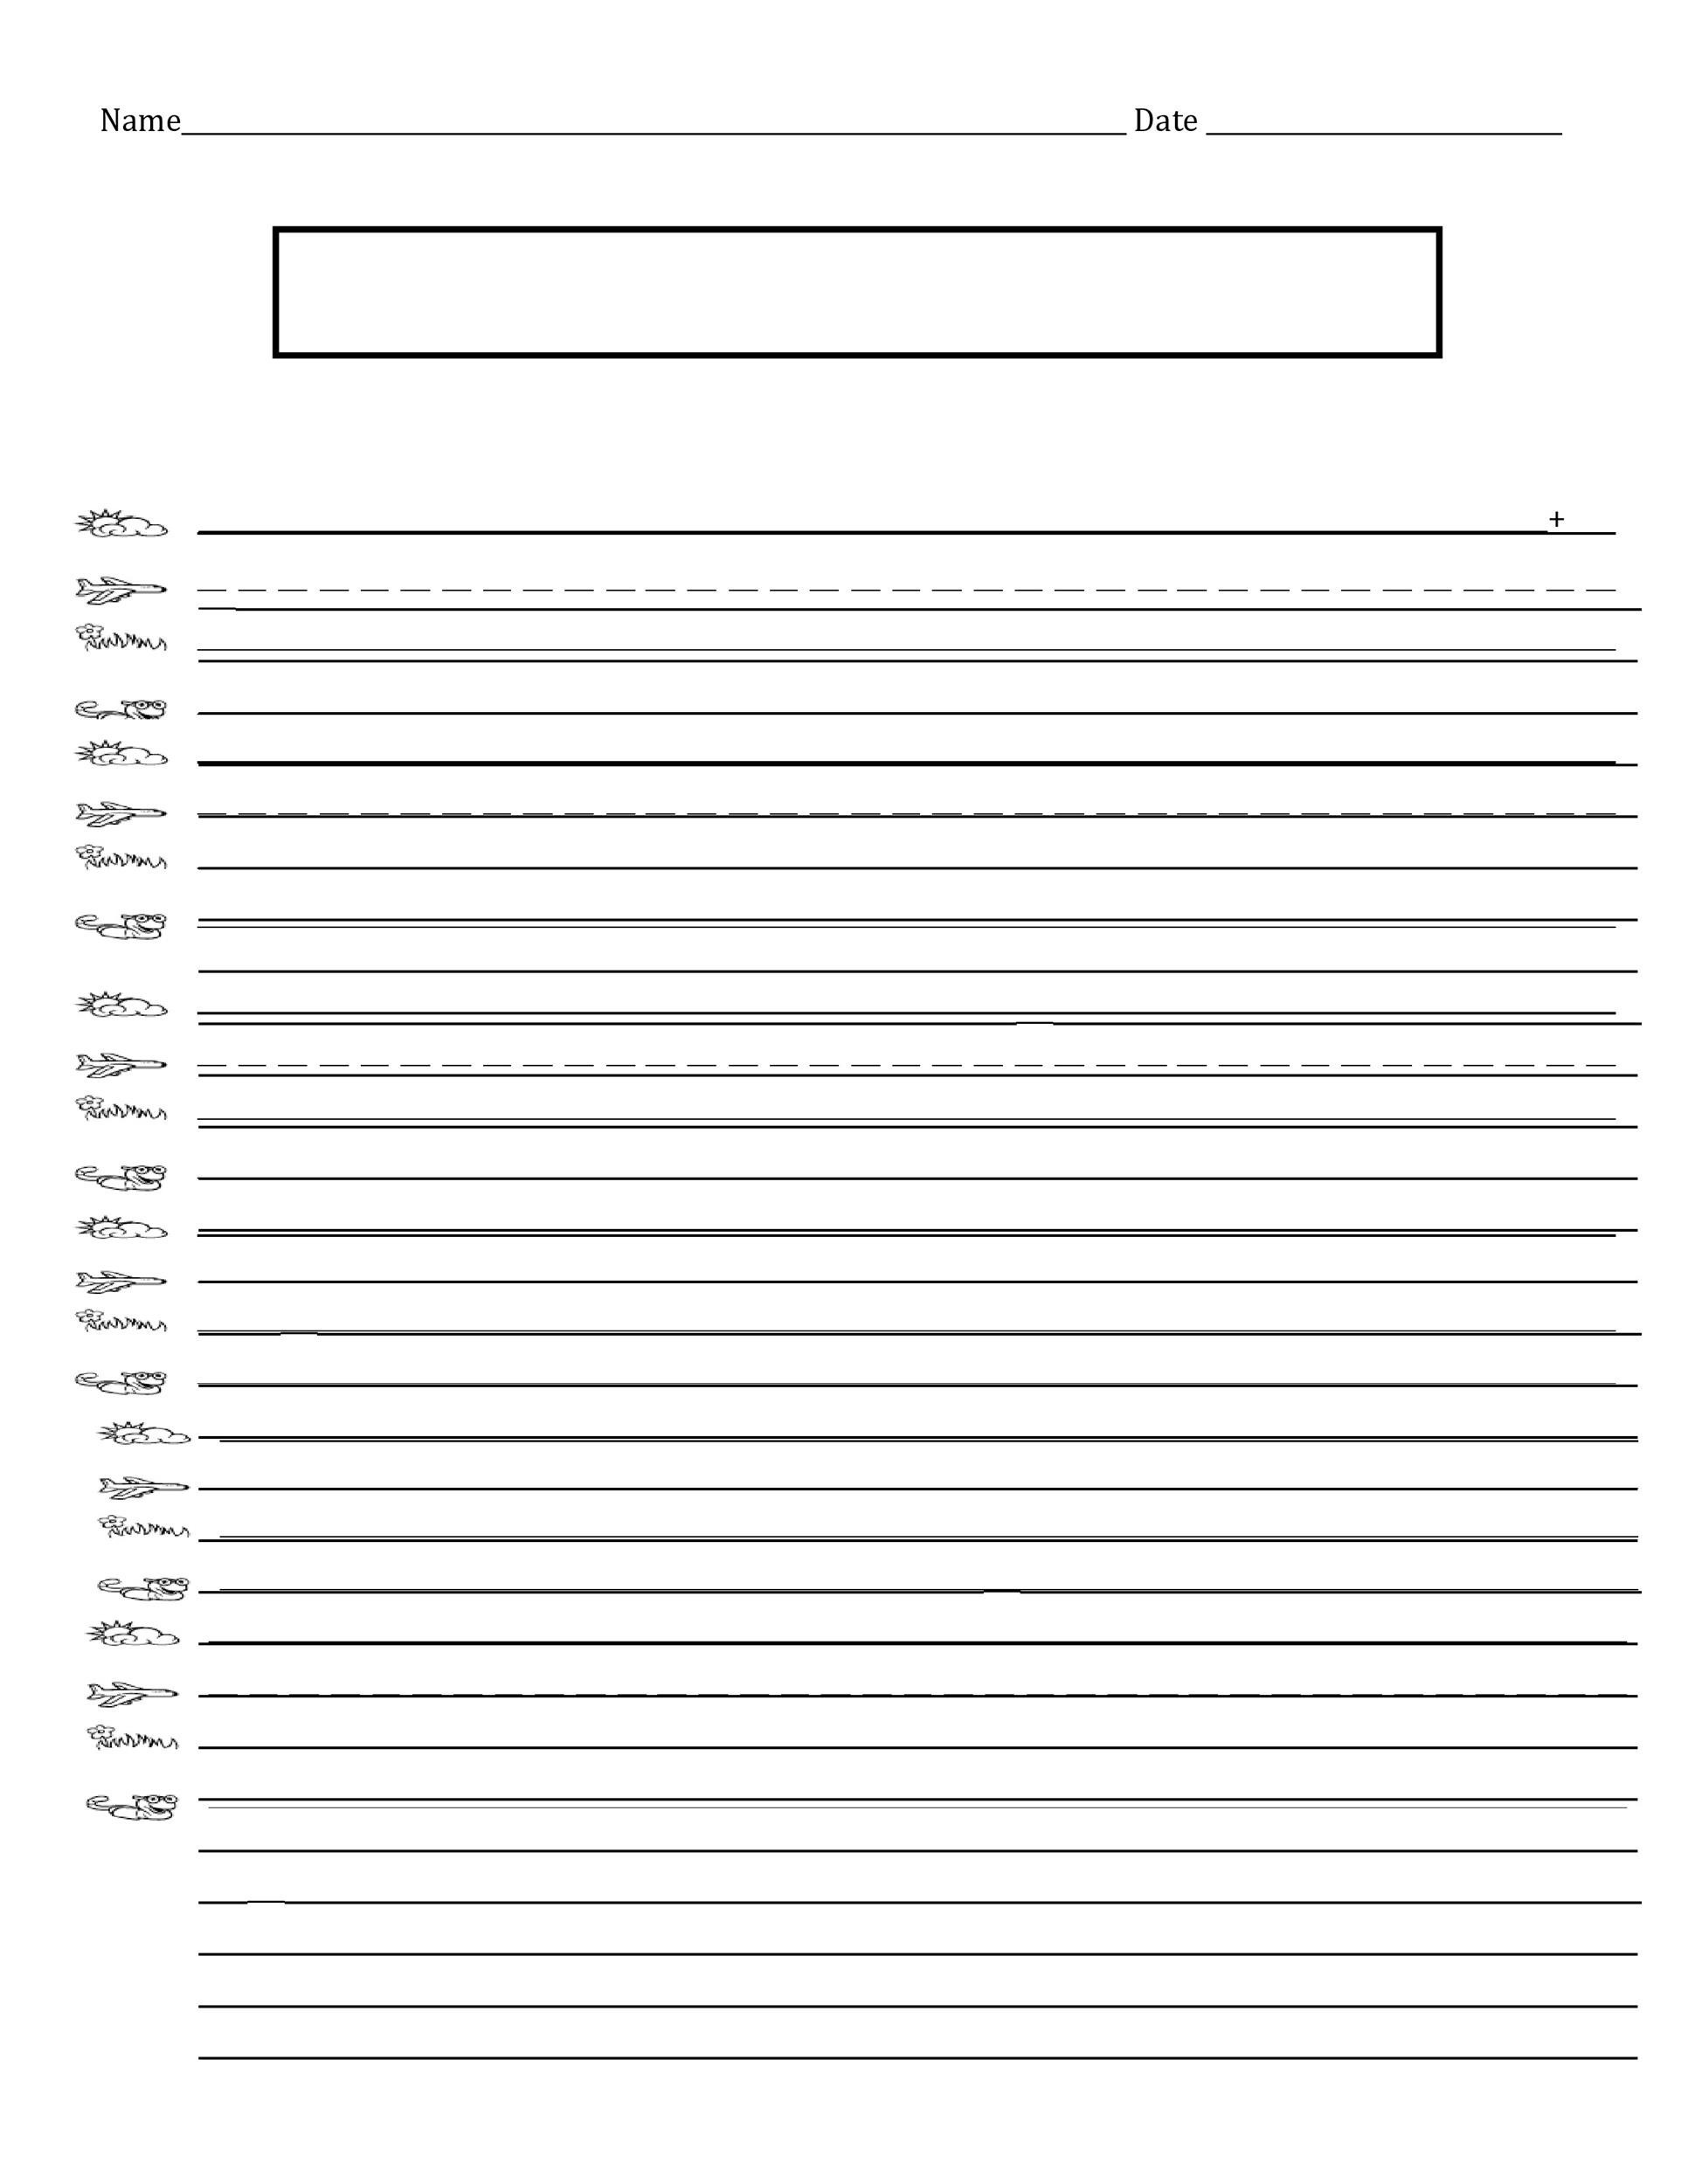 32 Printable Lined Paper Templates Templatelab